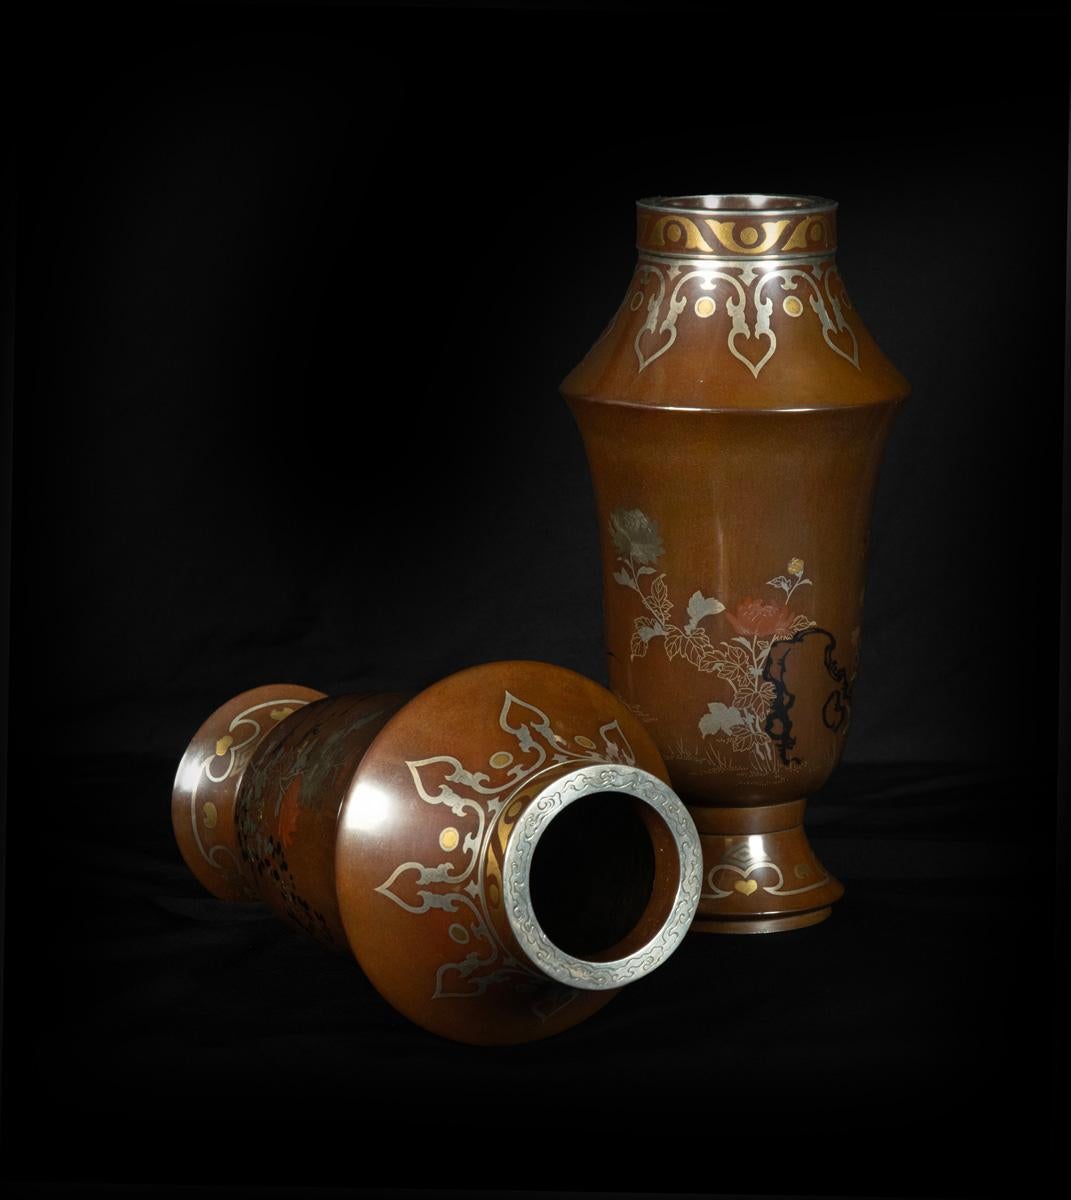 As part of our Japanese works of art collection we are delighted to offer this unusual shape heavy quality pair of early Meiji Period (1868-1912) bronze and mixed metal inlaid vases stemming from the Kanazawa school of metalworkers, based in